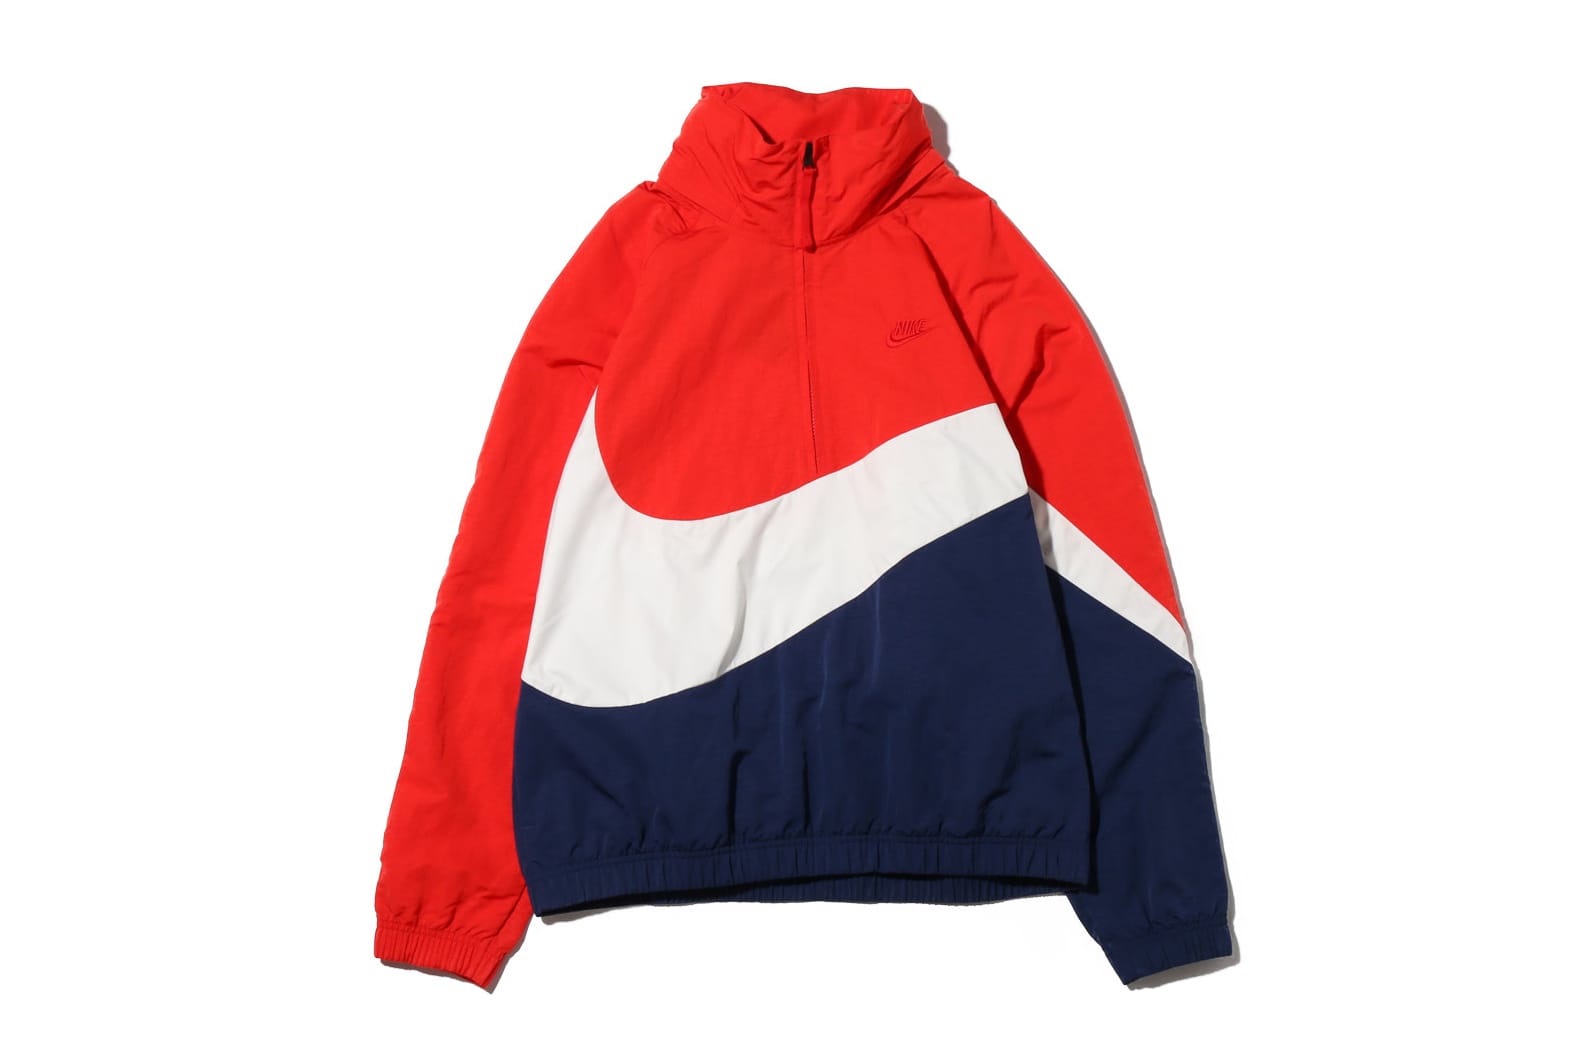 nike jacket red white and blue